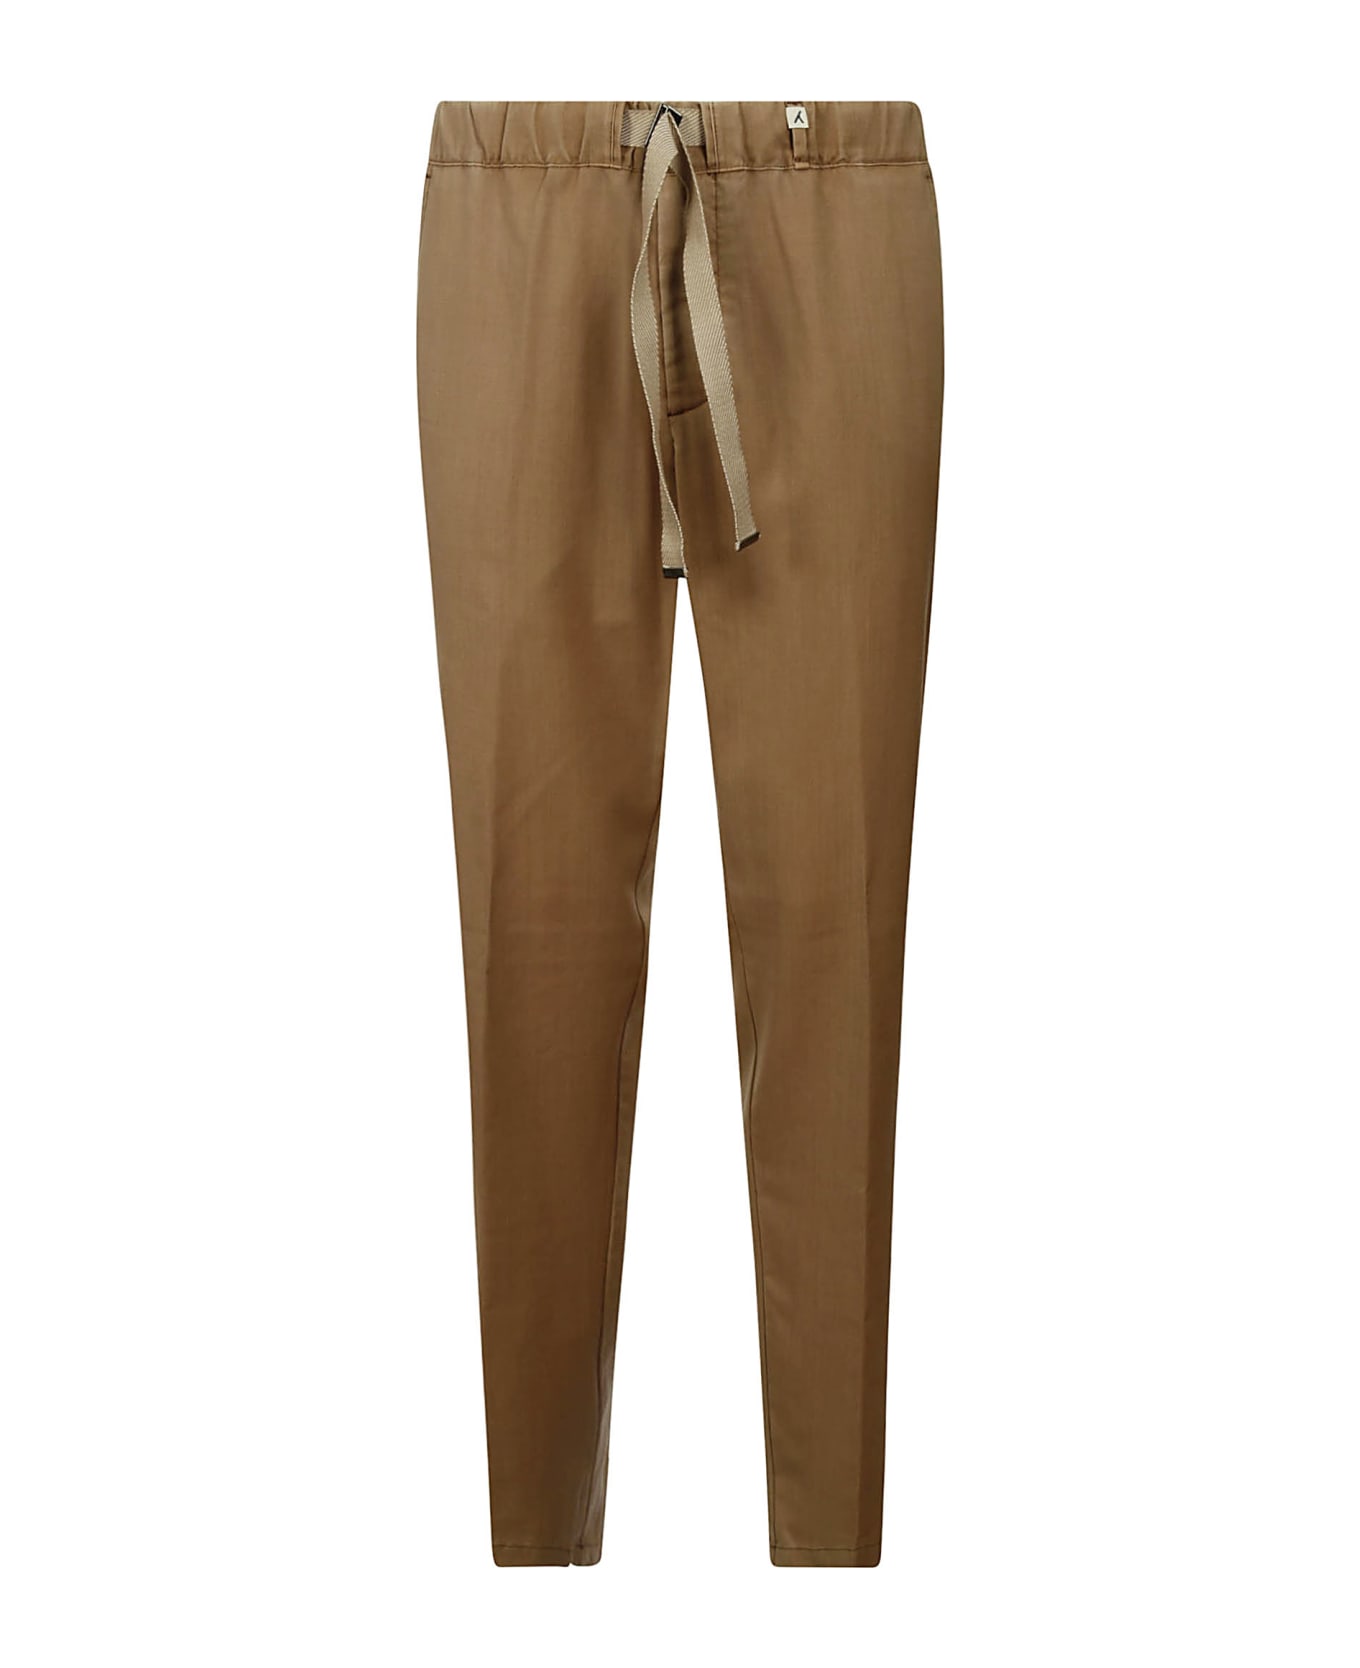 Myths Trousers - Beige